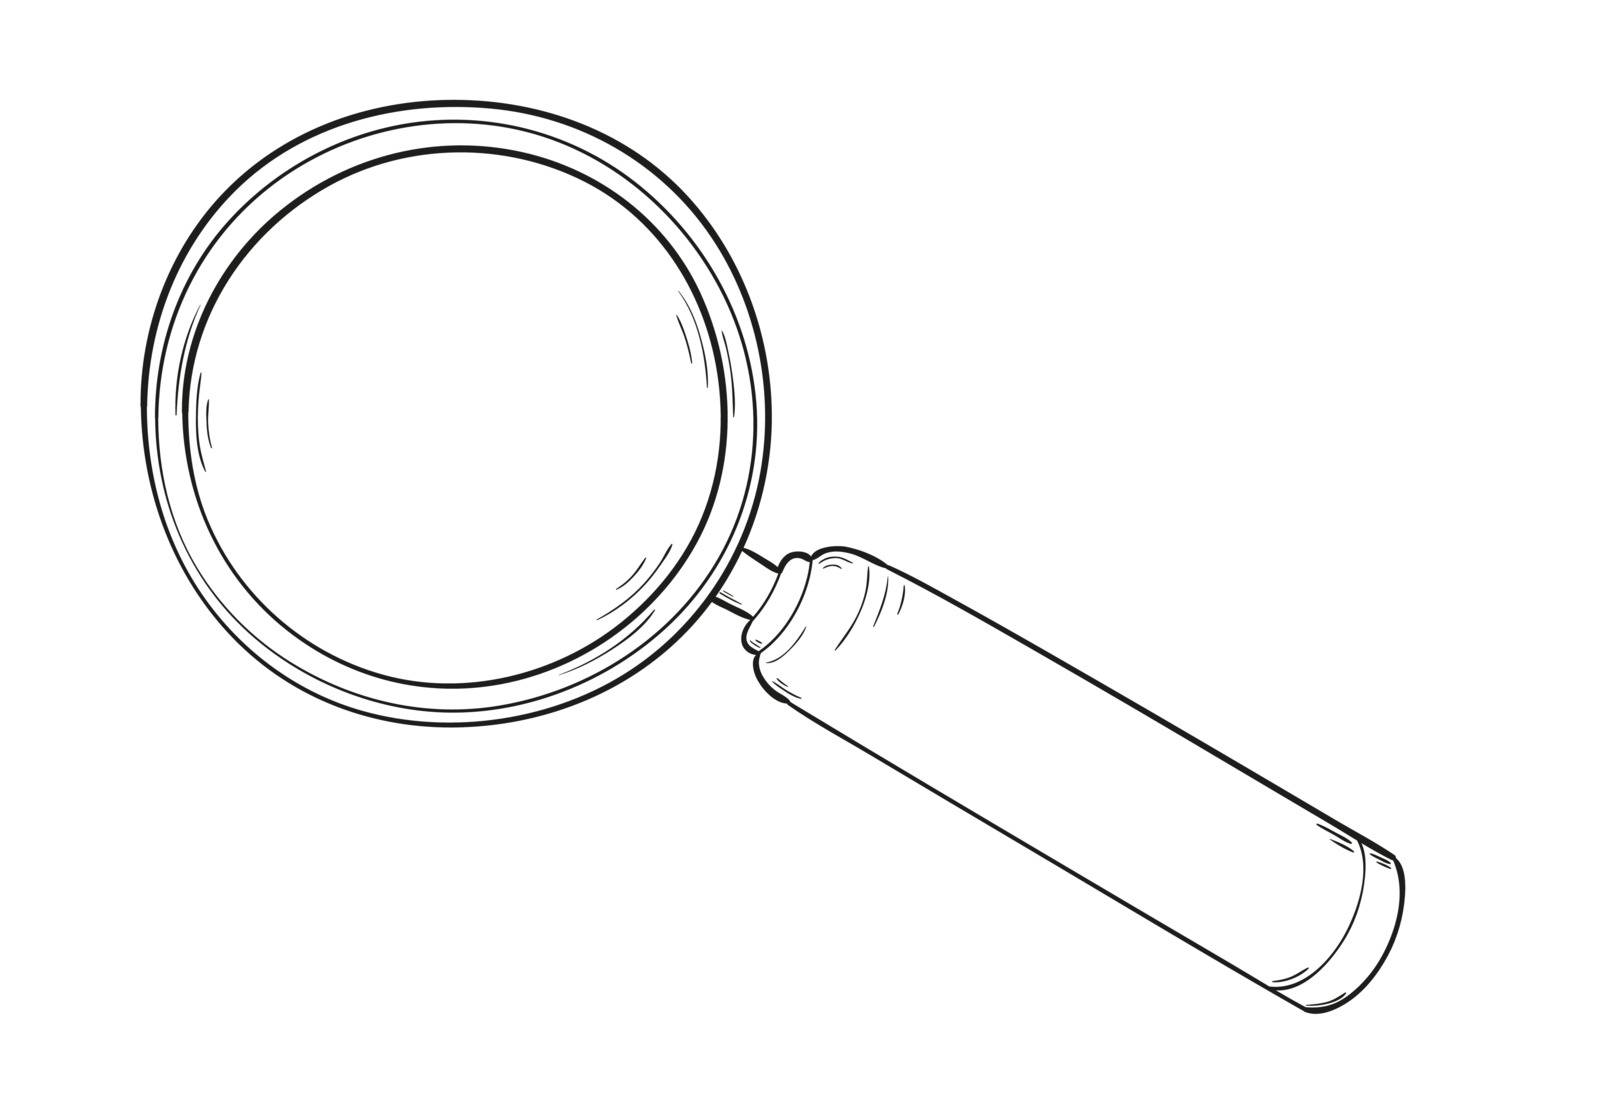 sketch of the elegant magnifying glass, isolated